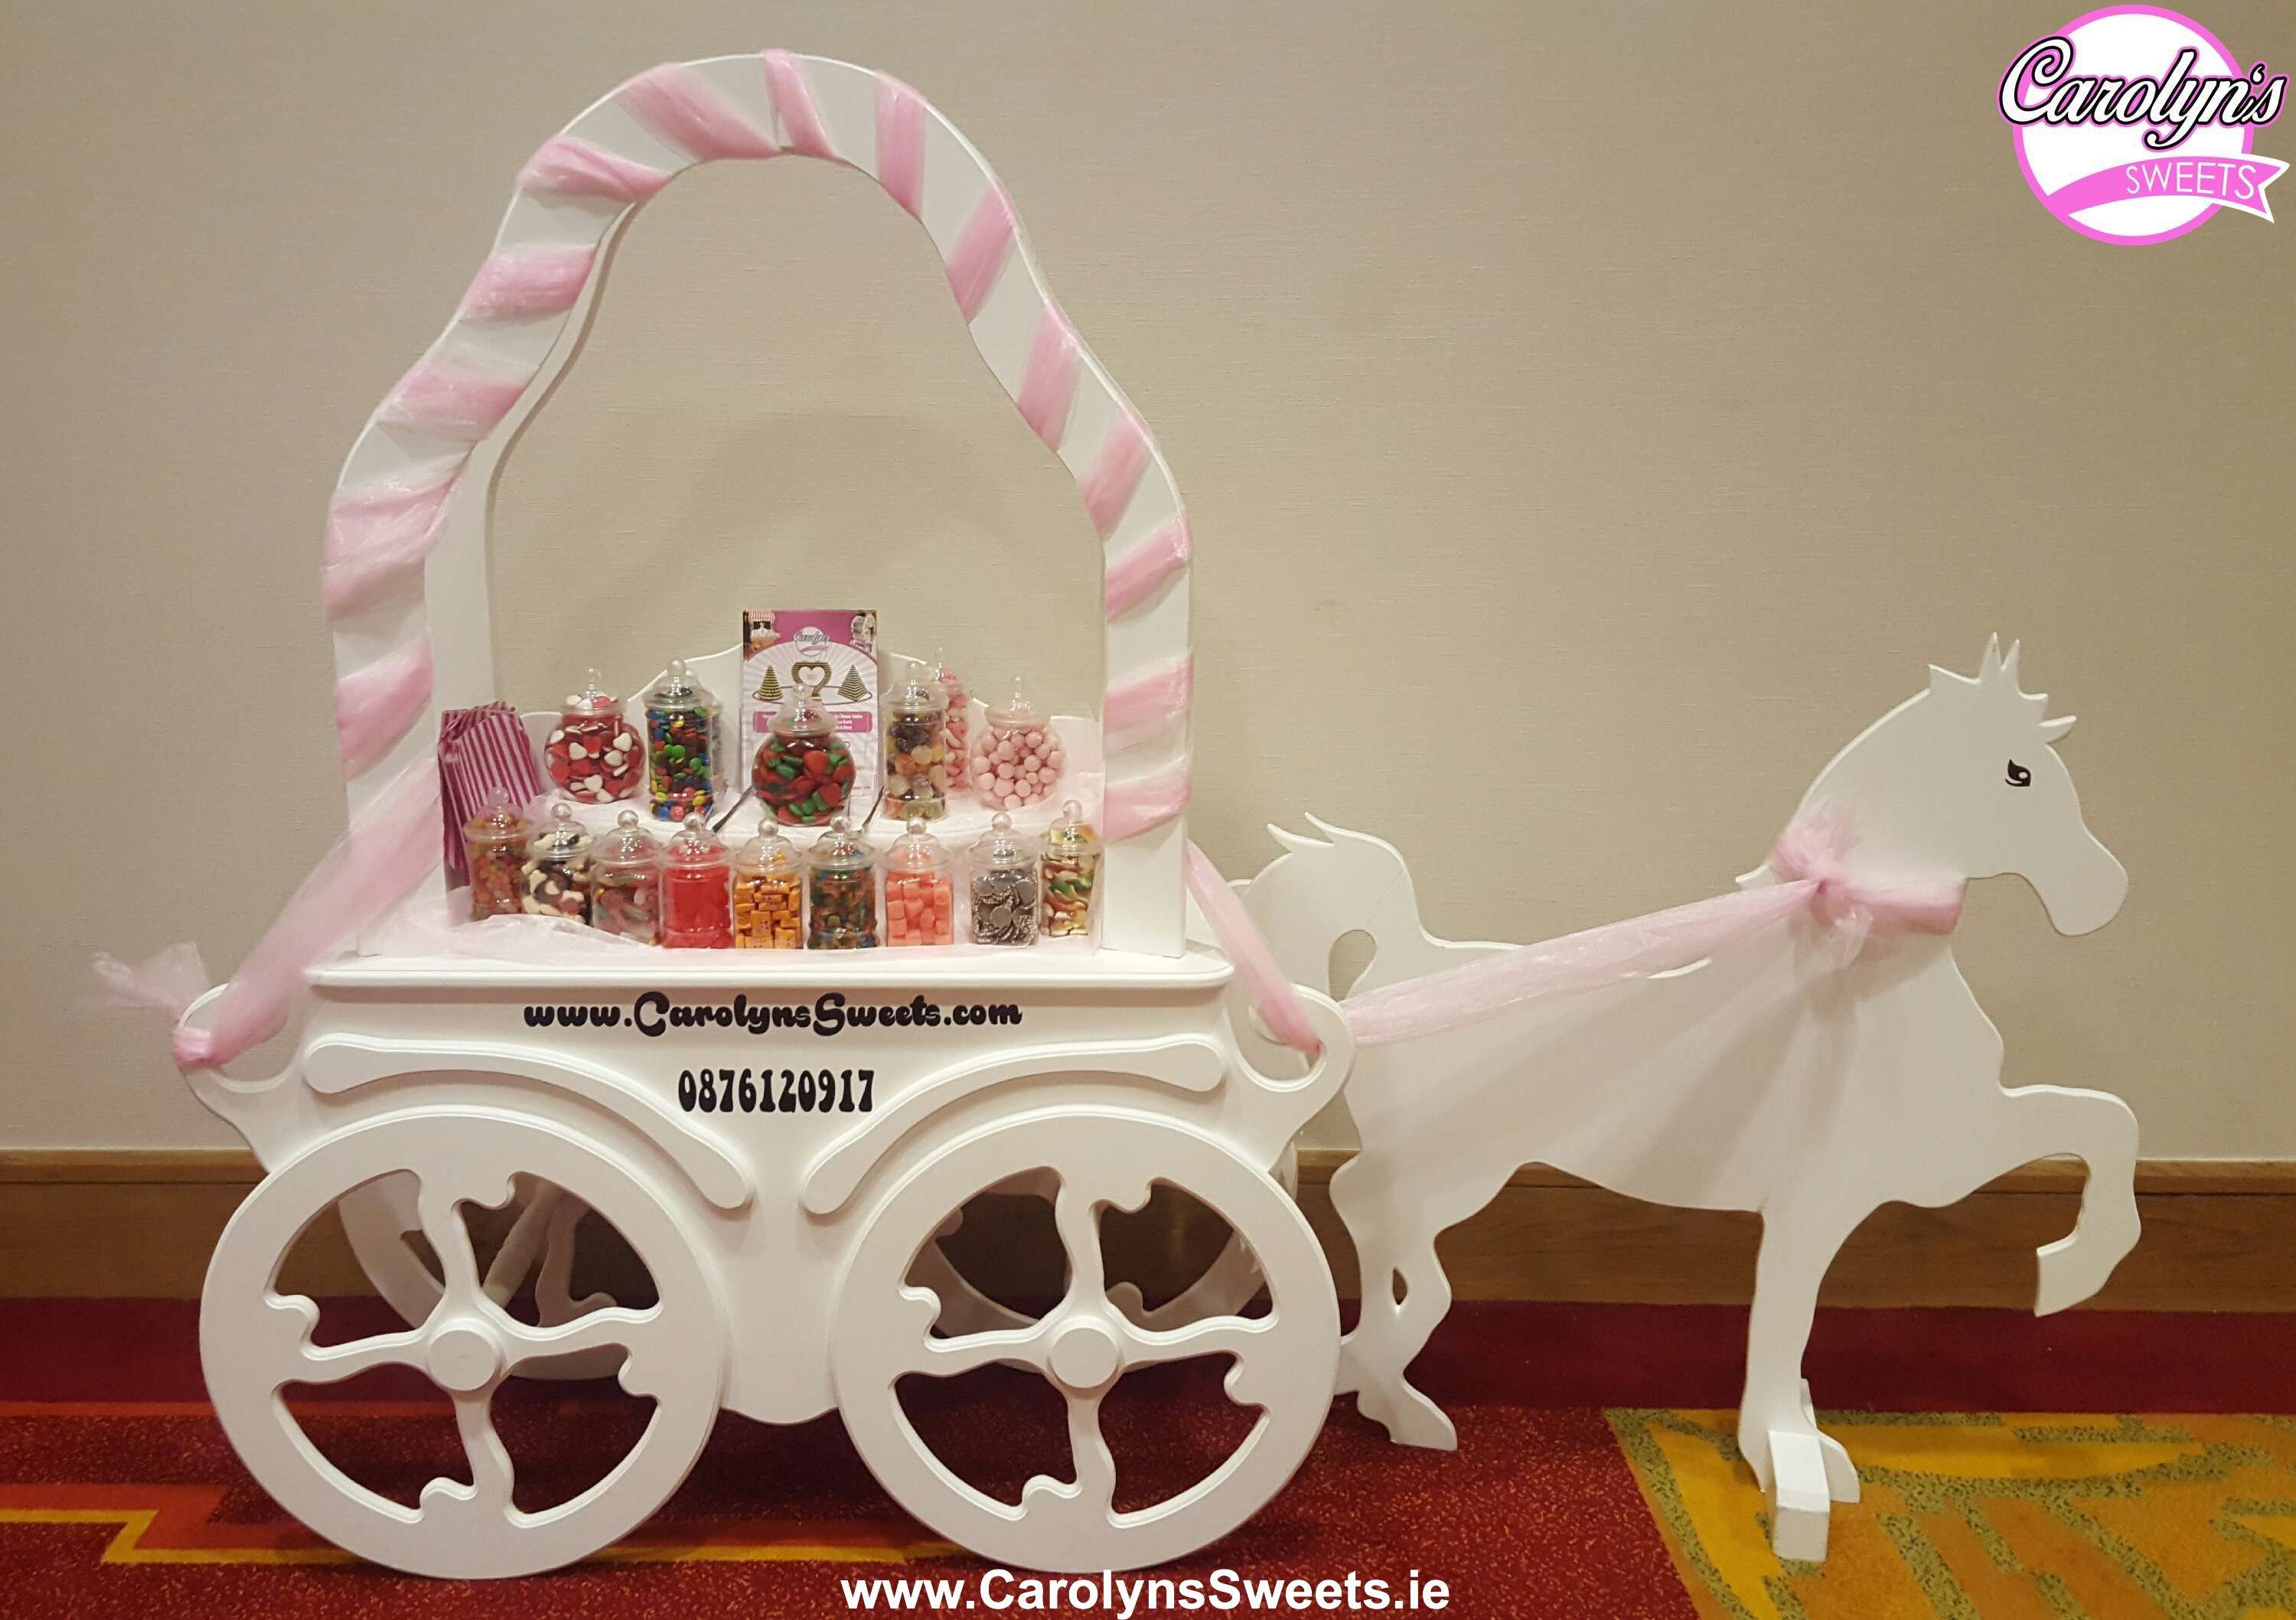 Childrens Candy Cart Hire2 2